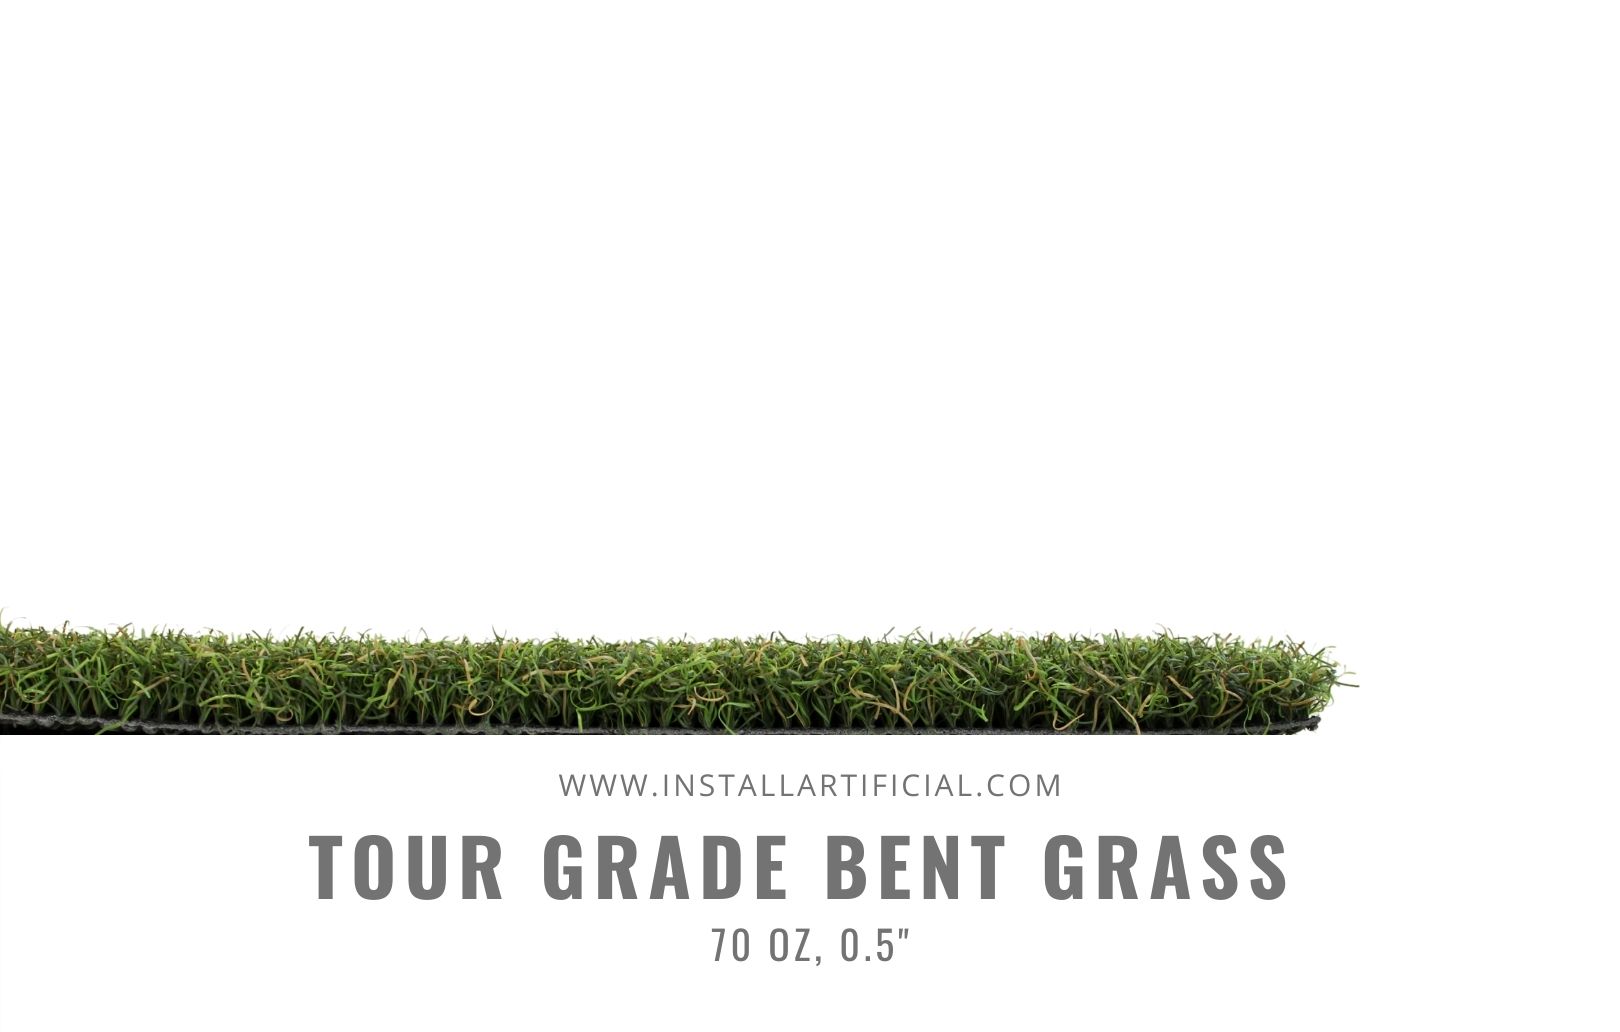 Tour Grade Bent Grass, Imperial Synthetic Turf, side